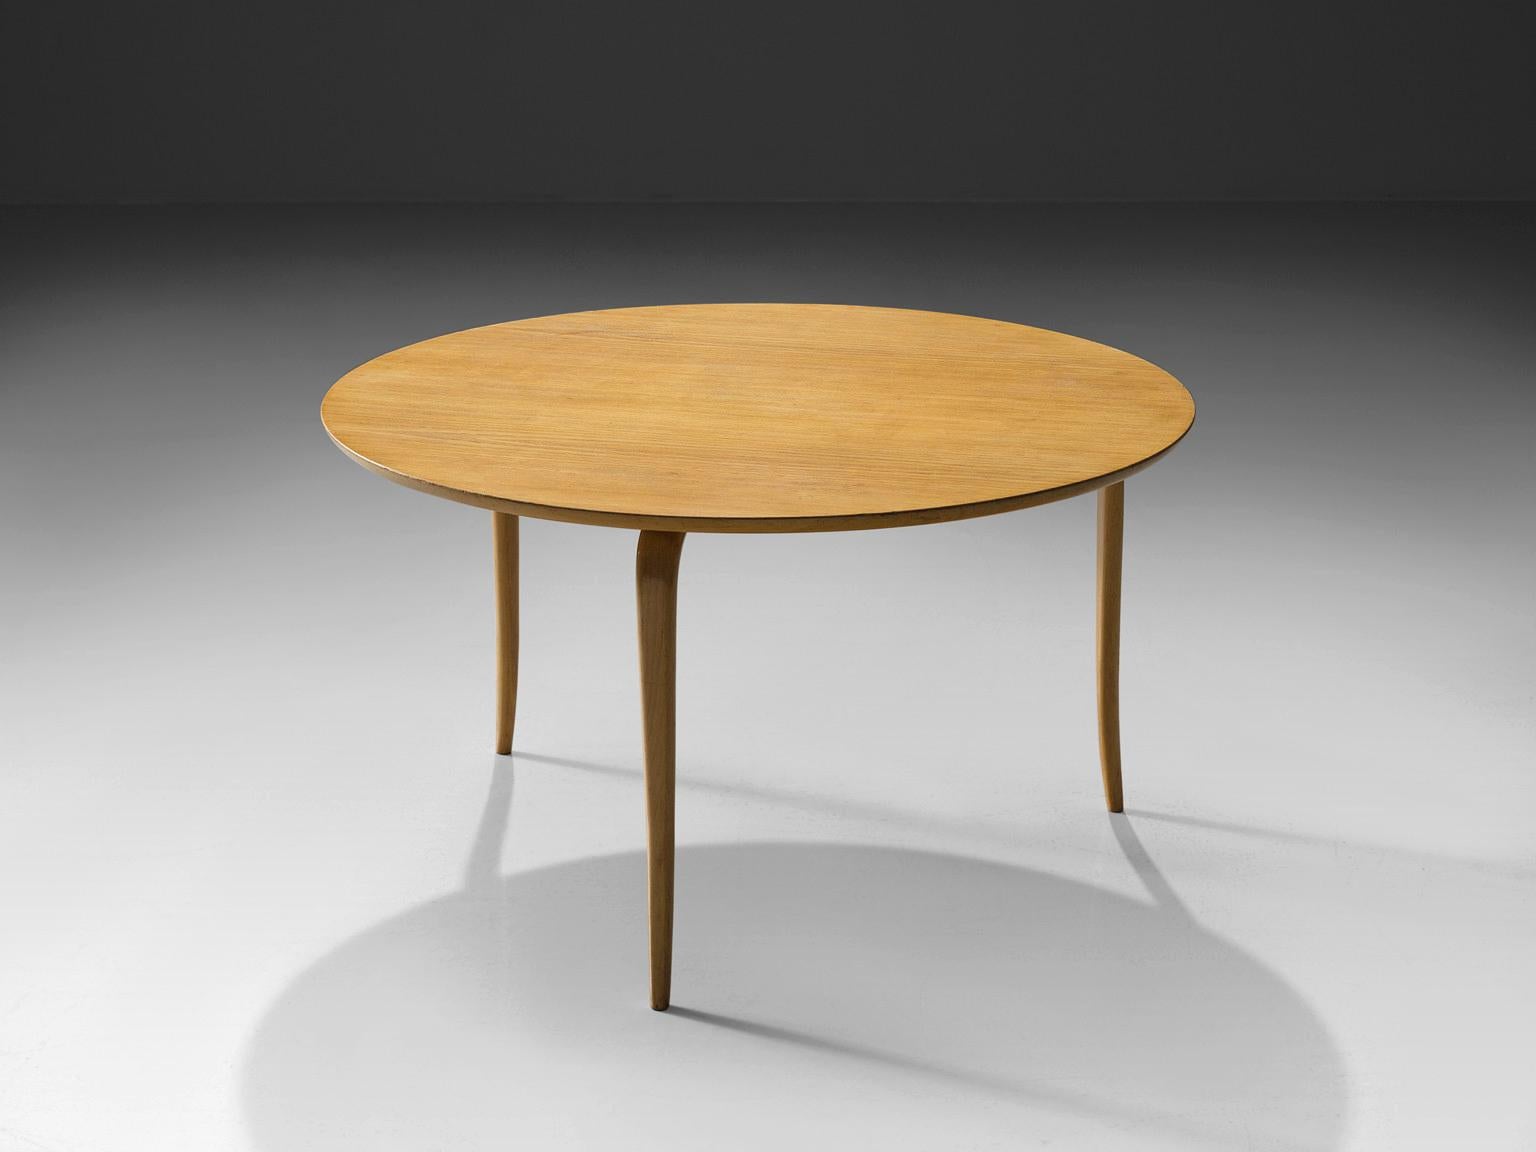 Bruno Mathsson for Karl Mathsson, coffee table, model 'Annika', ash, Sweden, 1950s.

This coffee table, named 'Annika', is complemented with bent plywood with ash veneer legs executed in a fluently curved and tapered manner. These light legs are